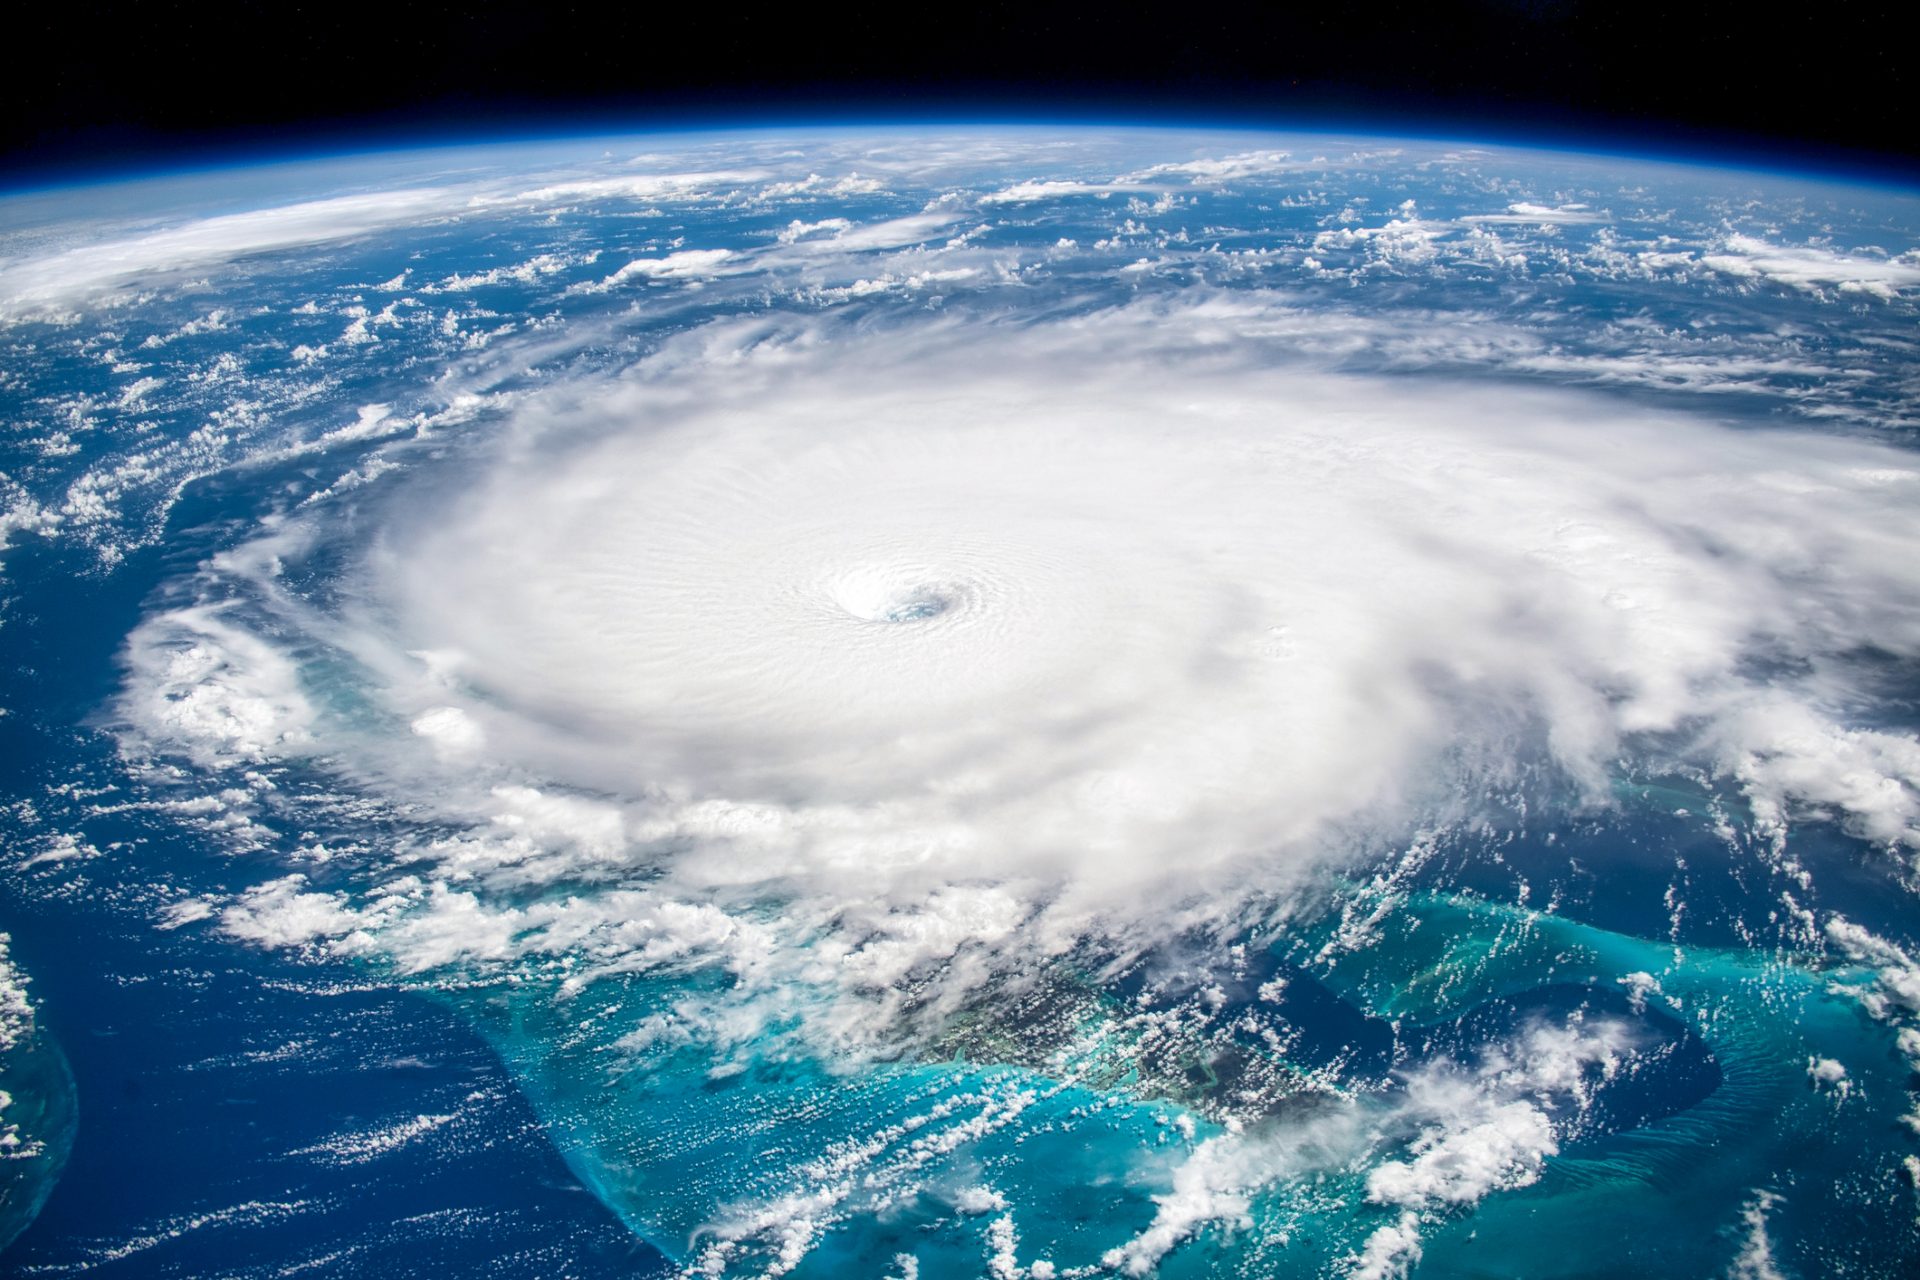 But what is El Niño and why will it make hurricanes worse?